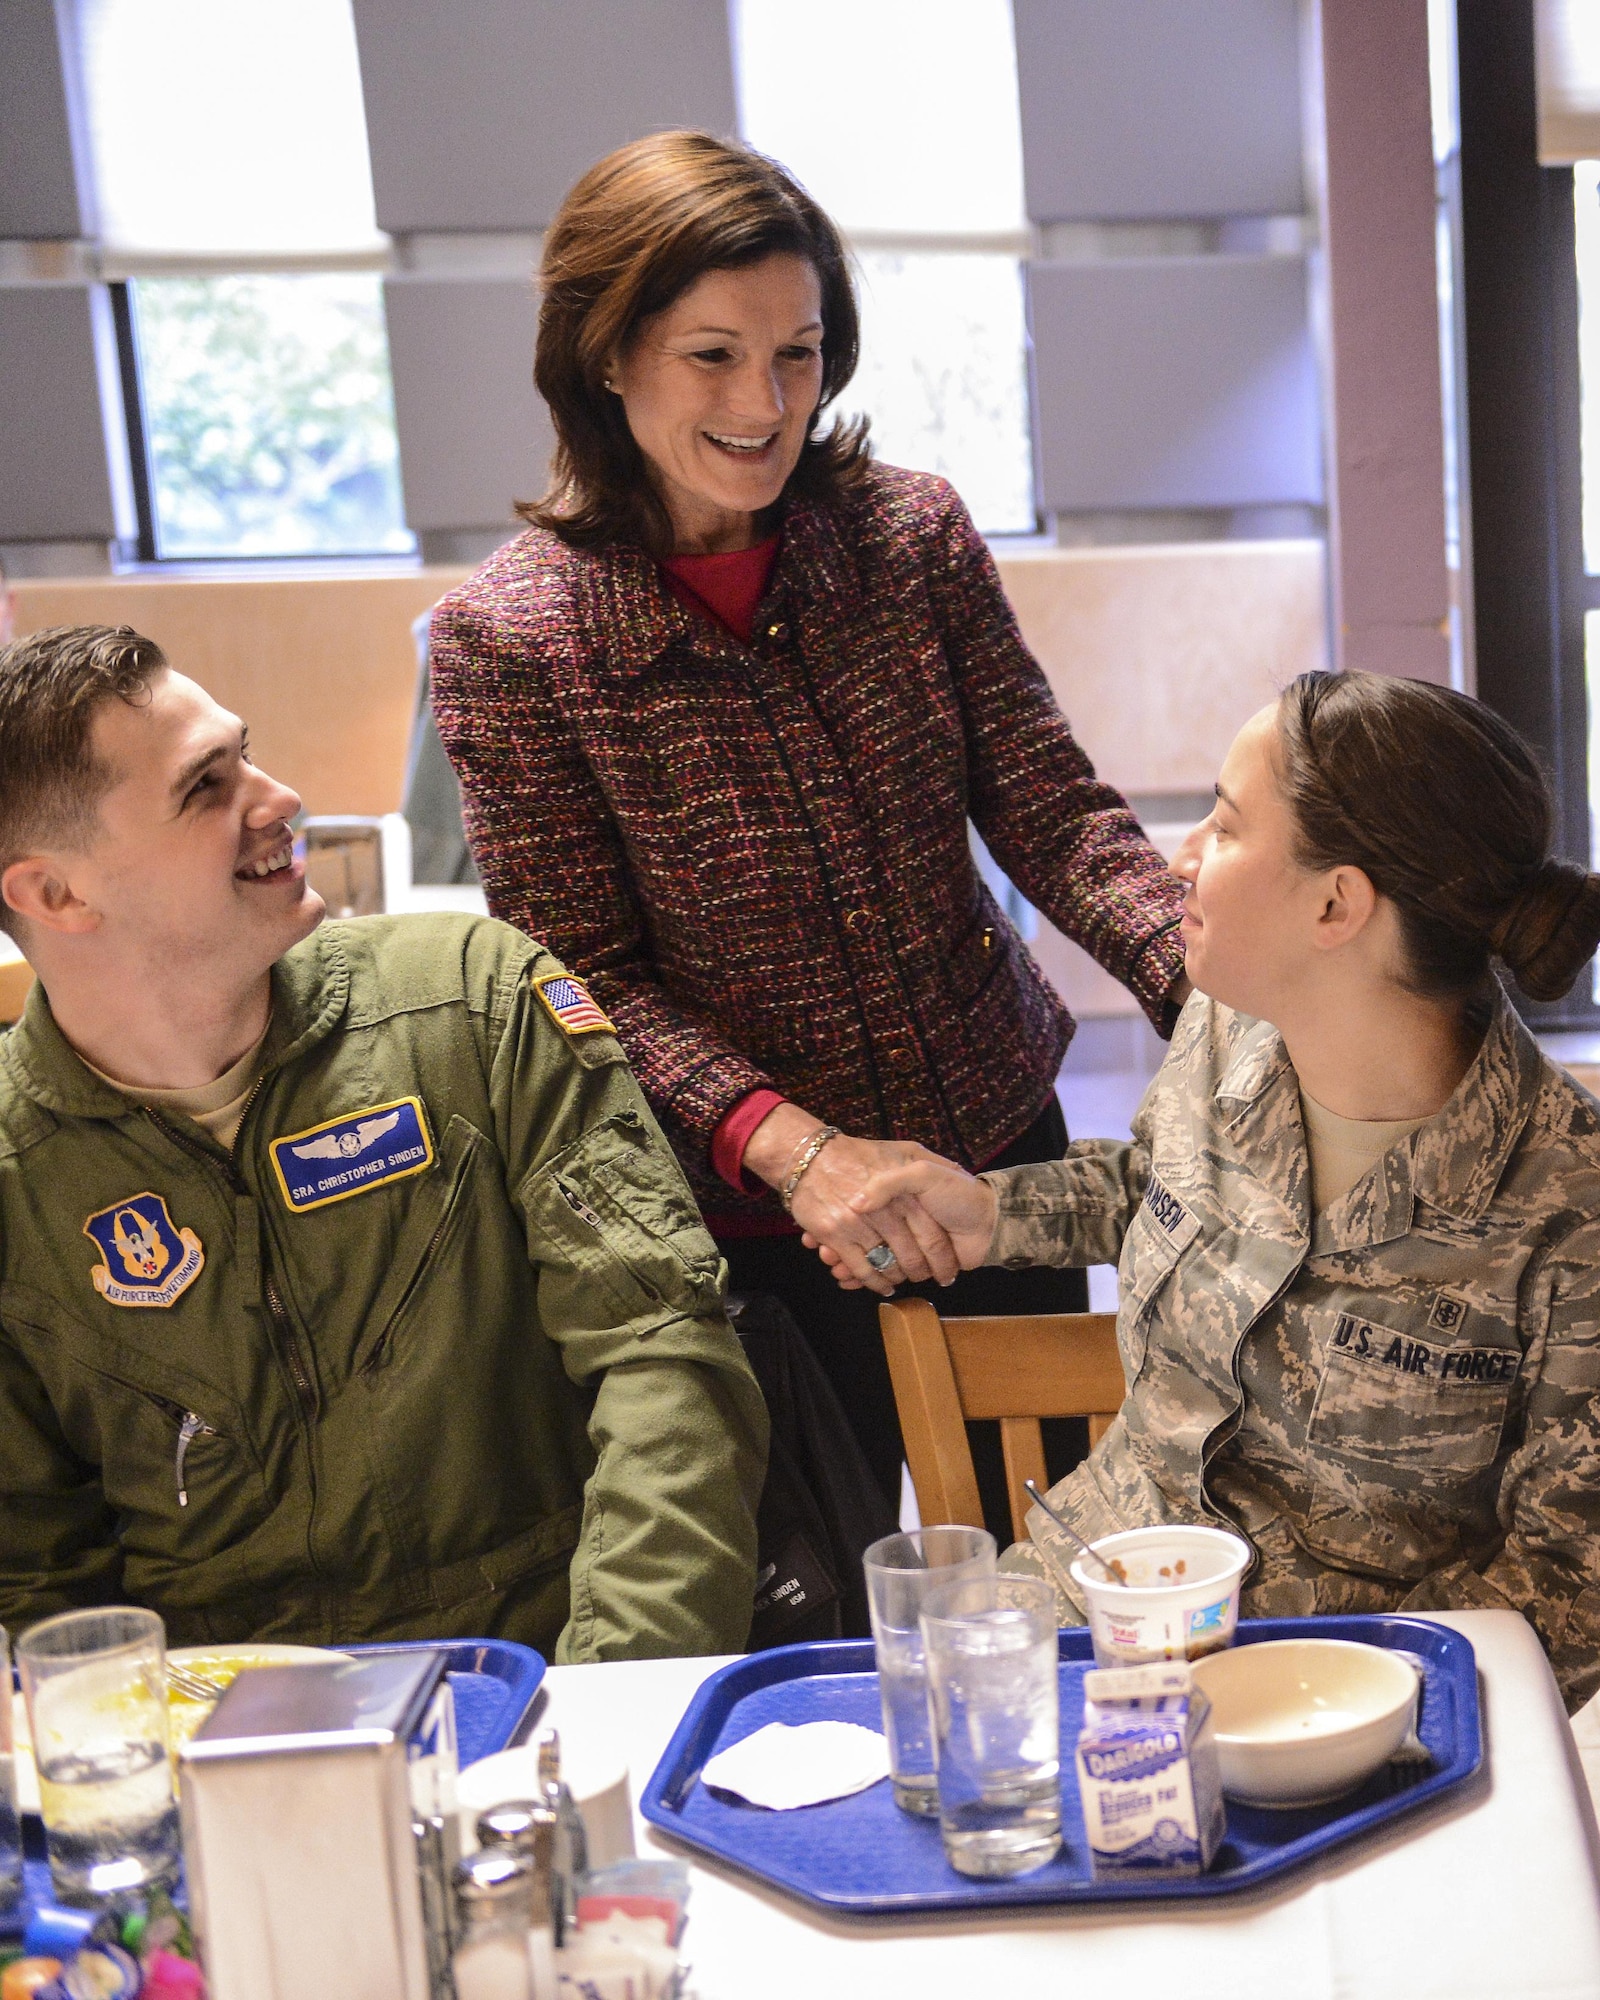 Betty Welsh, wife of Air Force Chief of Staff Gen. Mark A. Welsh III, meets with Senior Airman Christopher Sinden, 313th Airlift Squadron loadmaster, and Senior Airman Erin Johansen, 62nd Medical Squadron aerospace medical technician, Feb. 4, 2014, during an Airmen's breakfast at Joint Base Lewis-McChord, Wash. Gen. and Mrs. Welsh had breakfast with a group of Team McChord Airmen and spouses and answered questions from the members. (U.S. Air Force photo/Tech. Sgt. Sean Tobin)